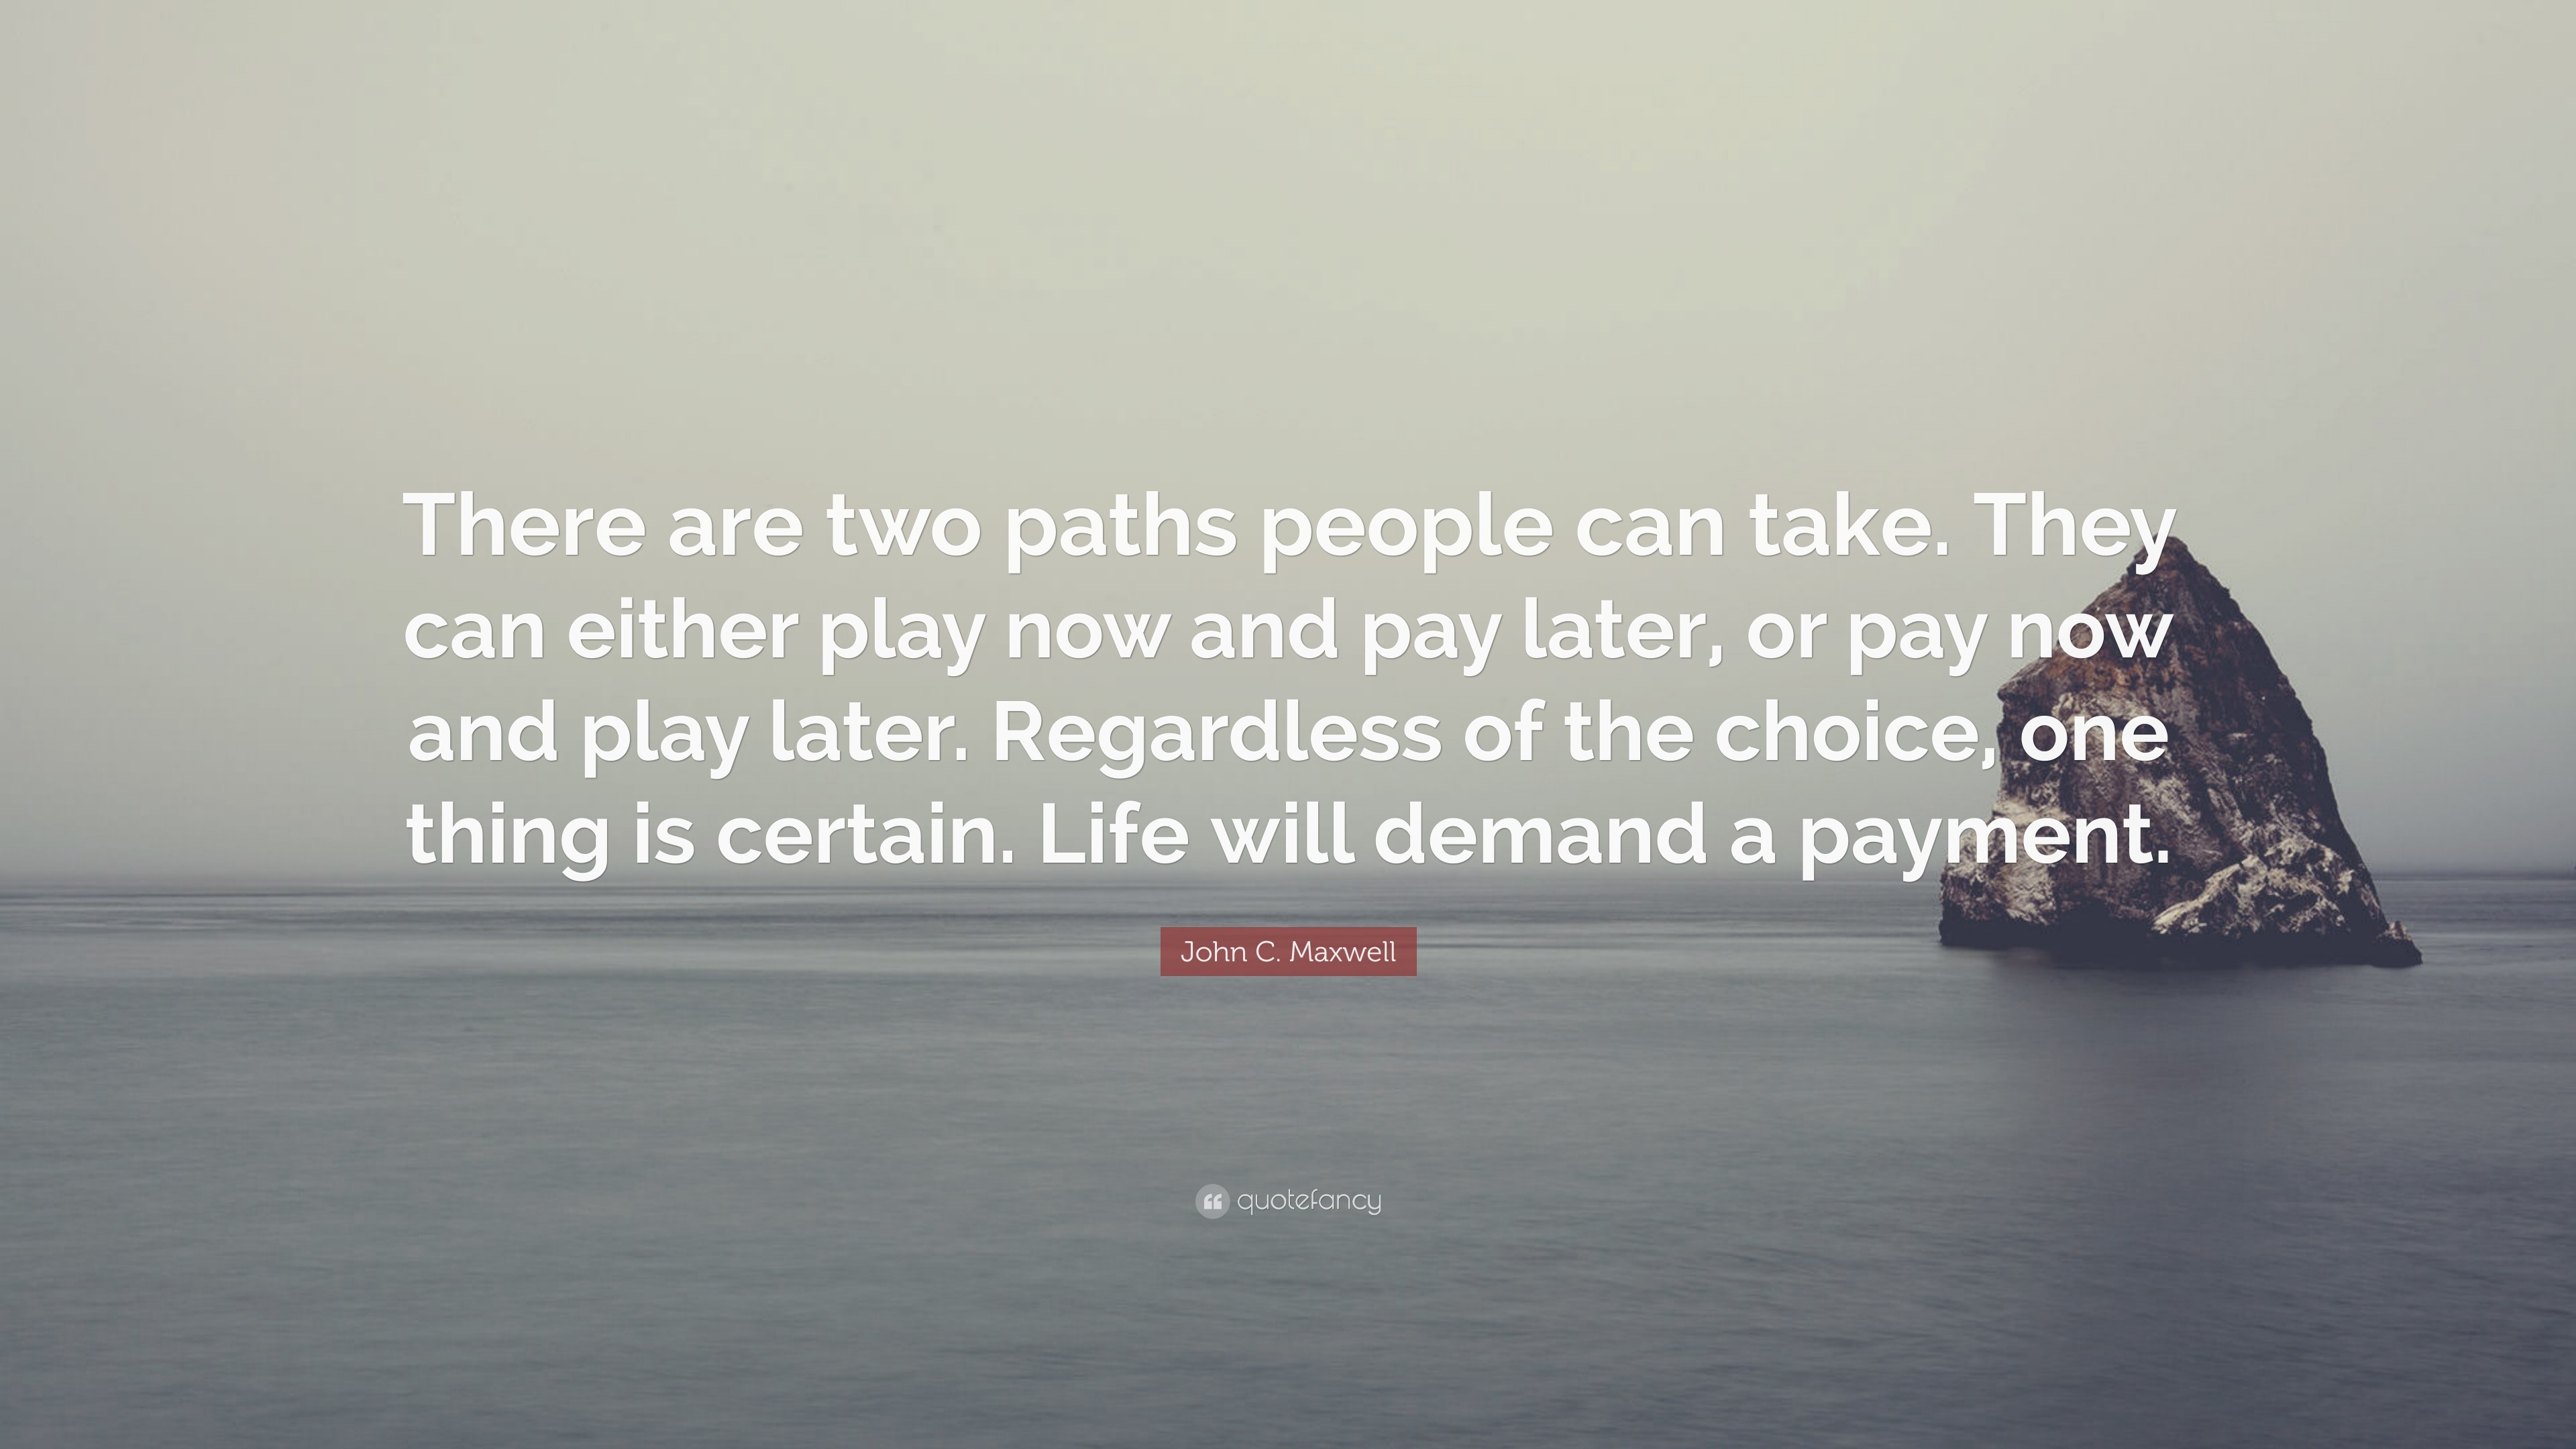 John C. Maxwell Quote: “There are two paths people can take. They can  either play now and pay later, or pay now and play later. Regardless of  th”